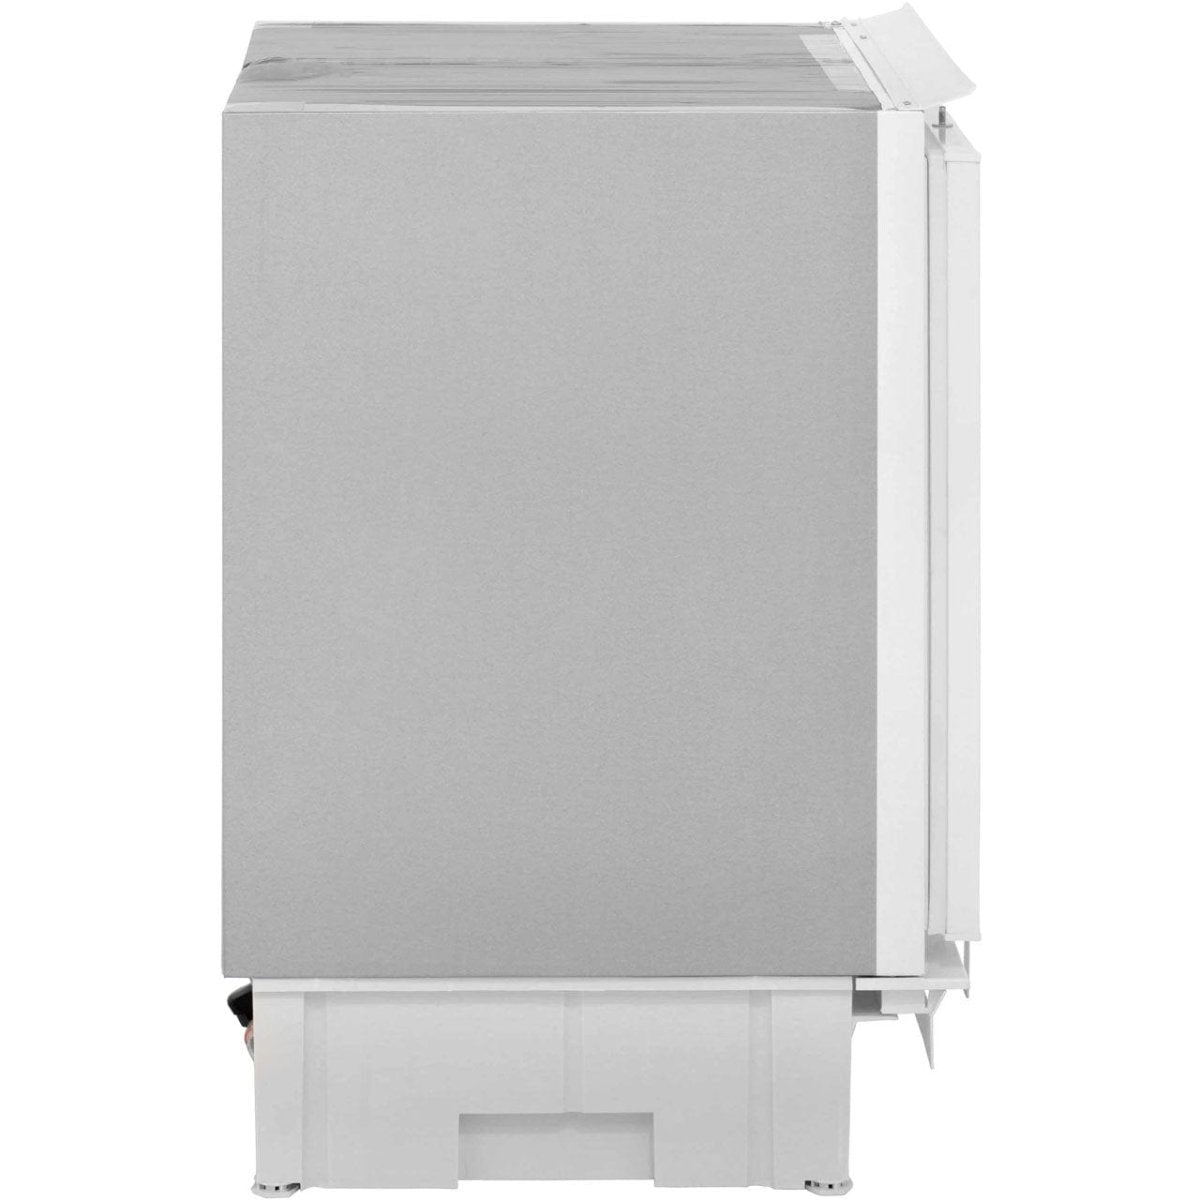 Hotpoint HLA1 146 Litre Integrated Under Counter Fridge A+ Energy Rating 60cm Wide - White - Atlantic Electrics